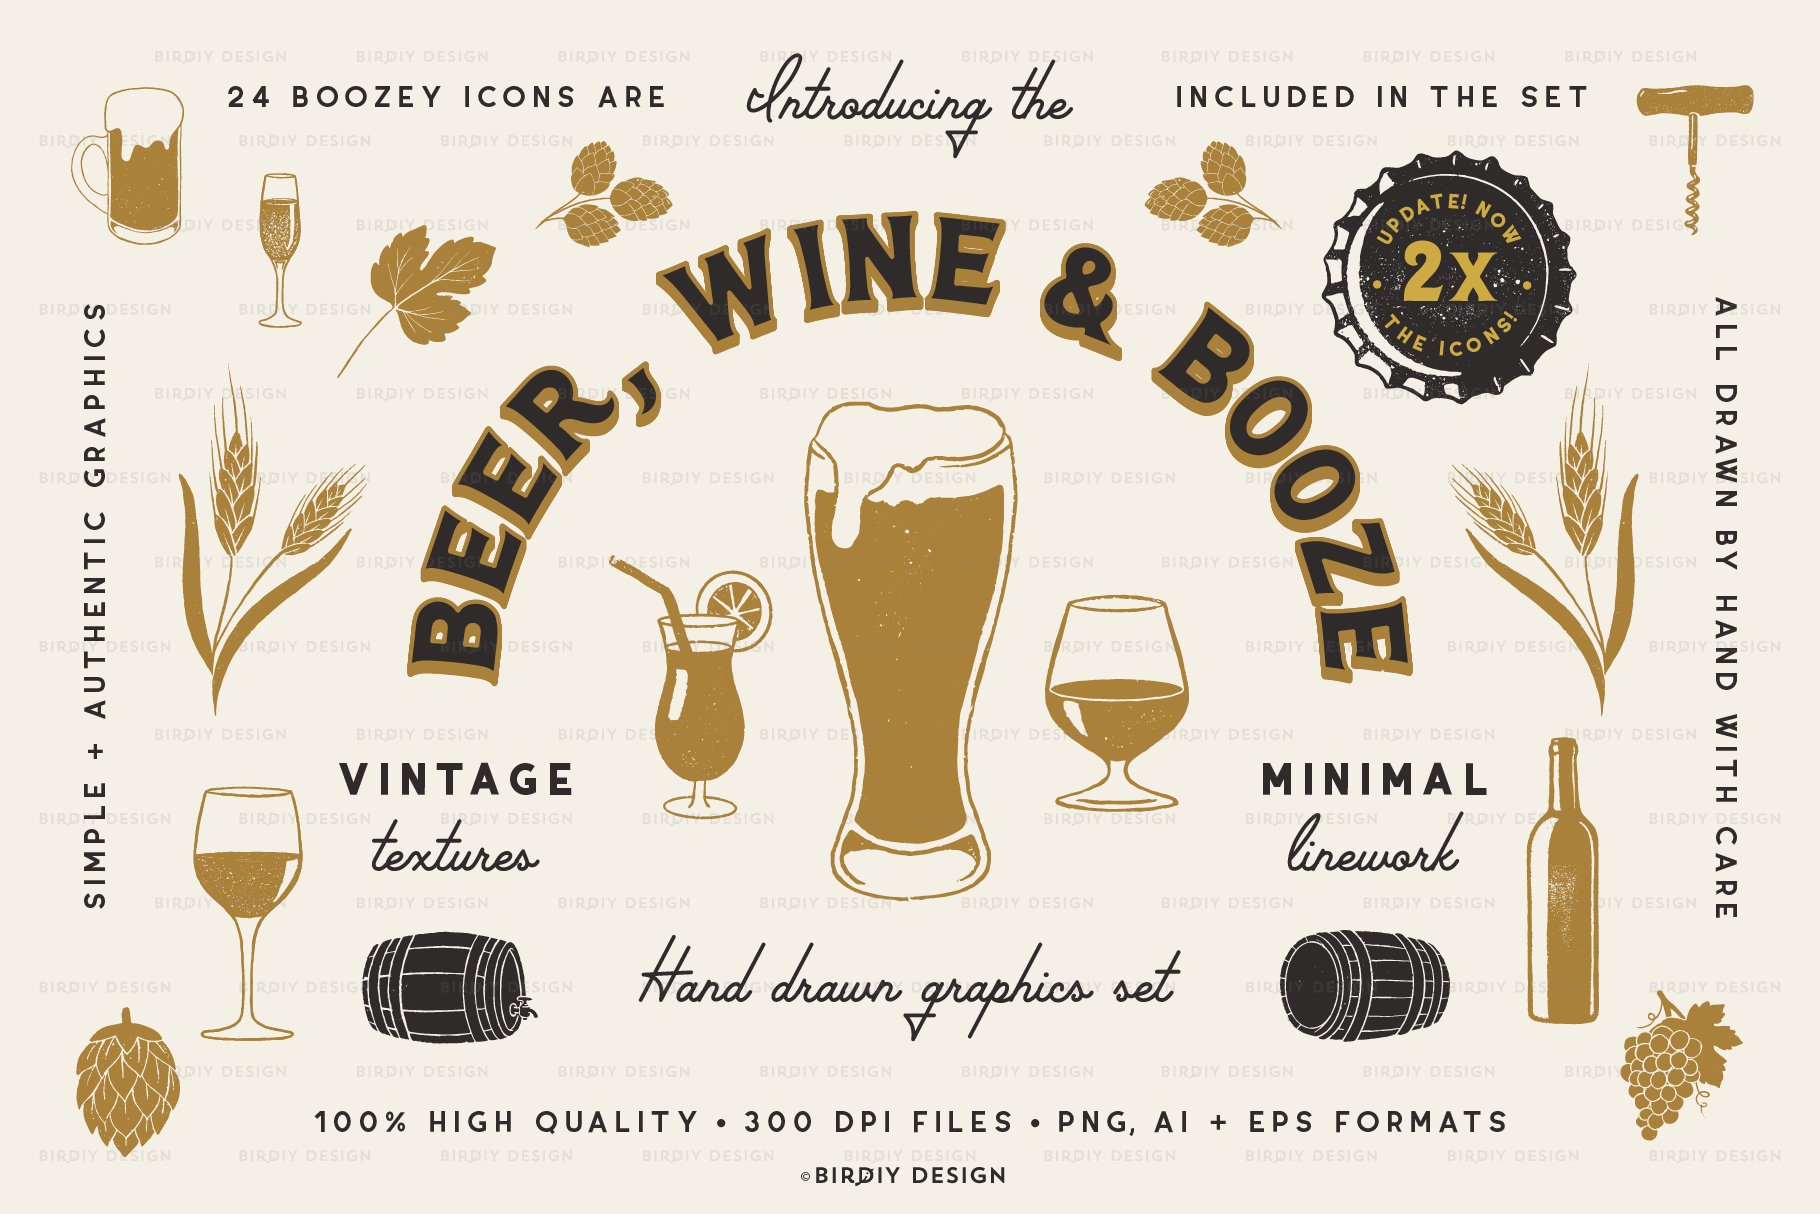 Beer, Wine & Liquor Icons cover image.